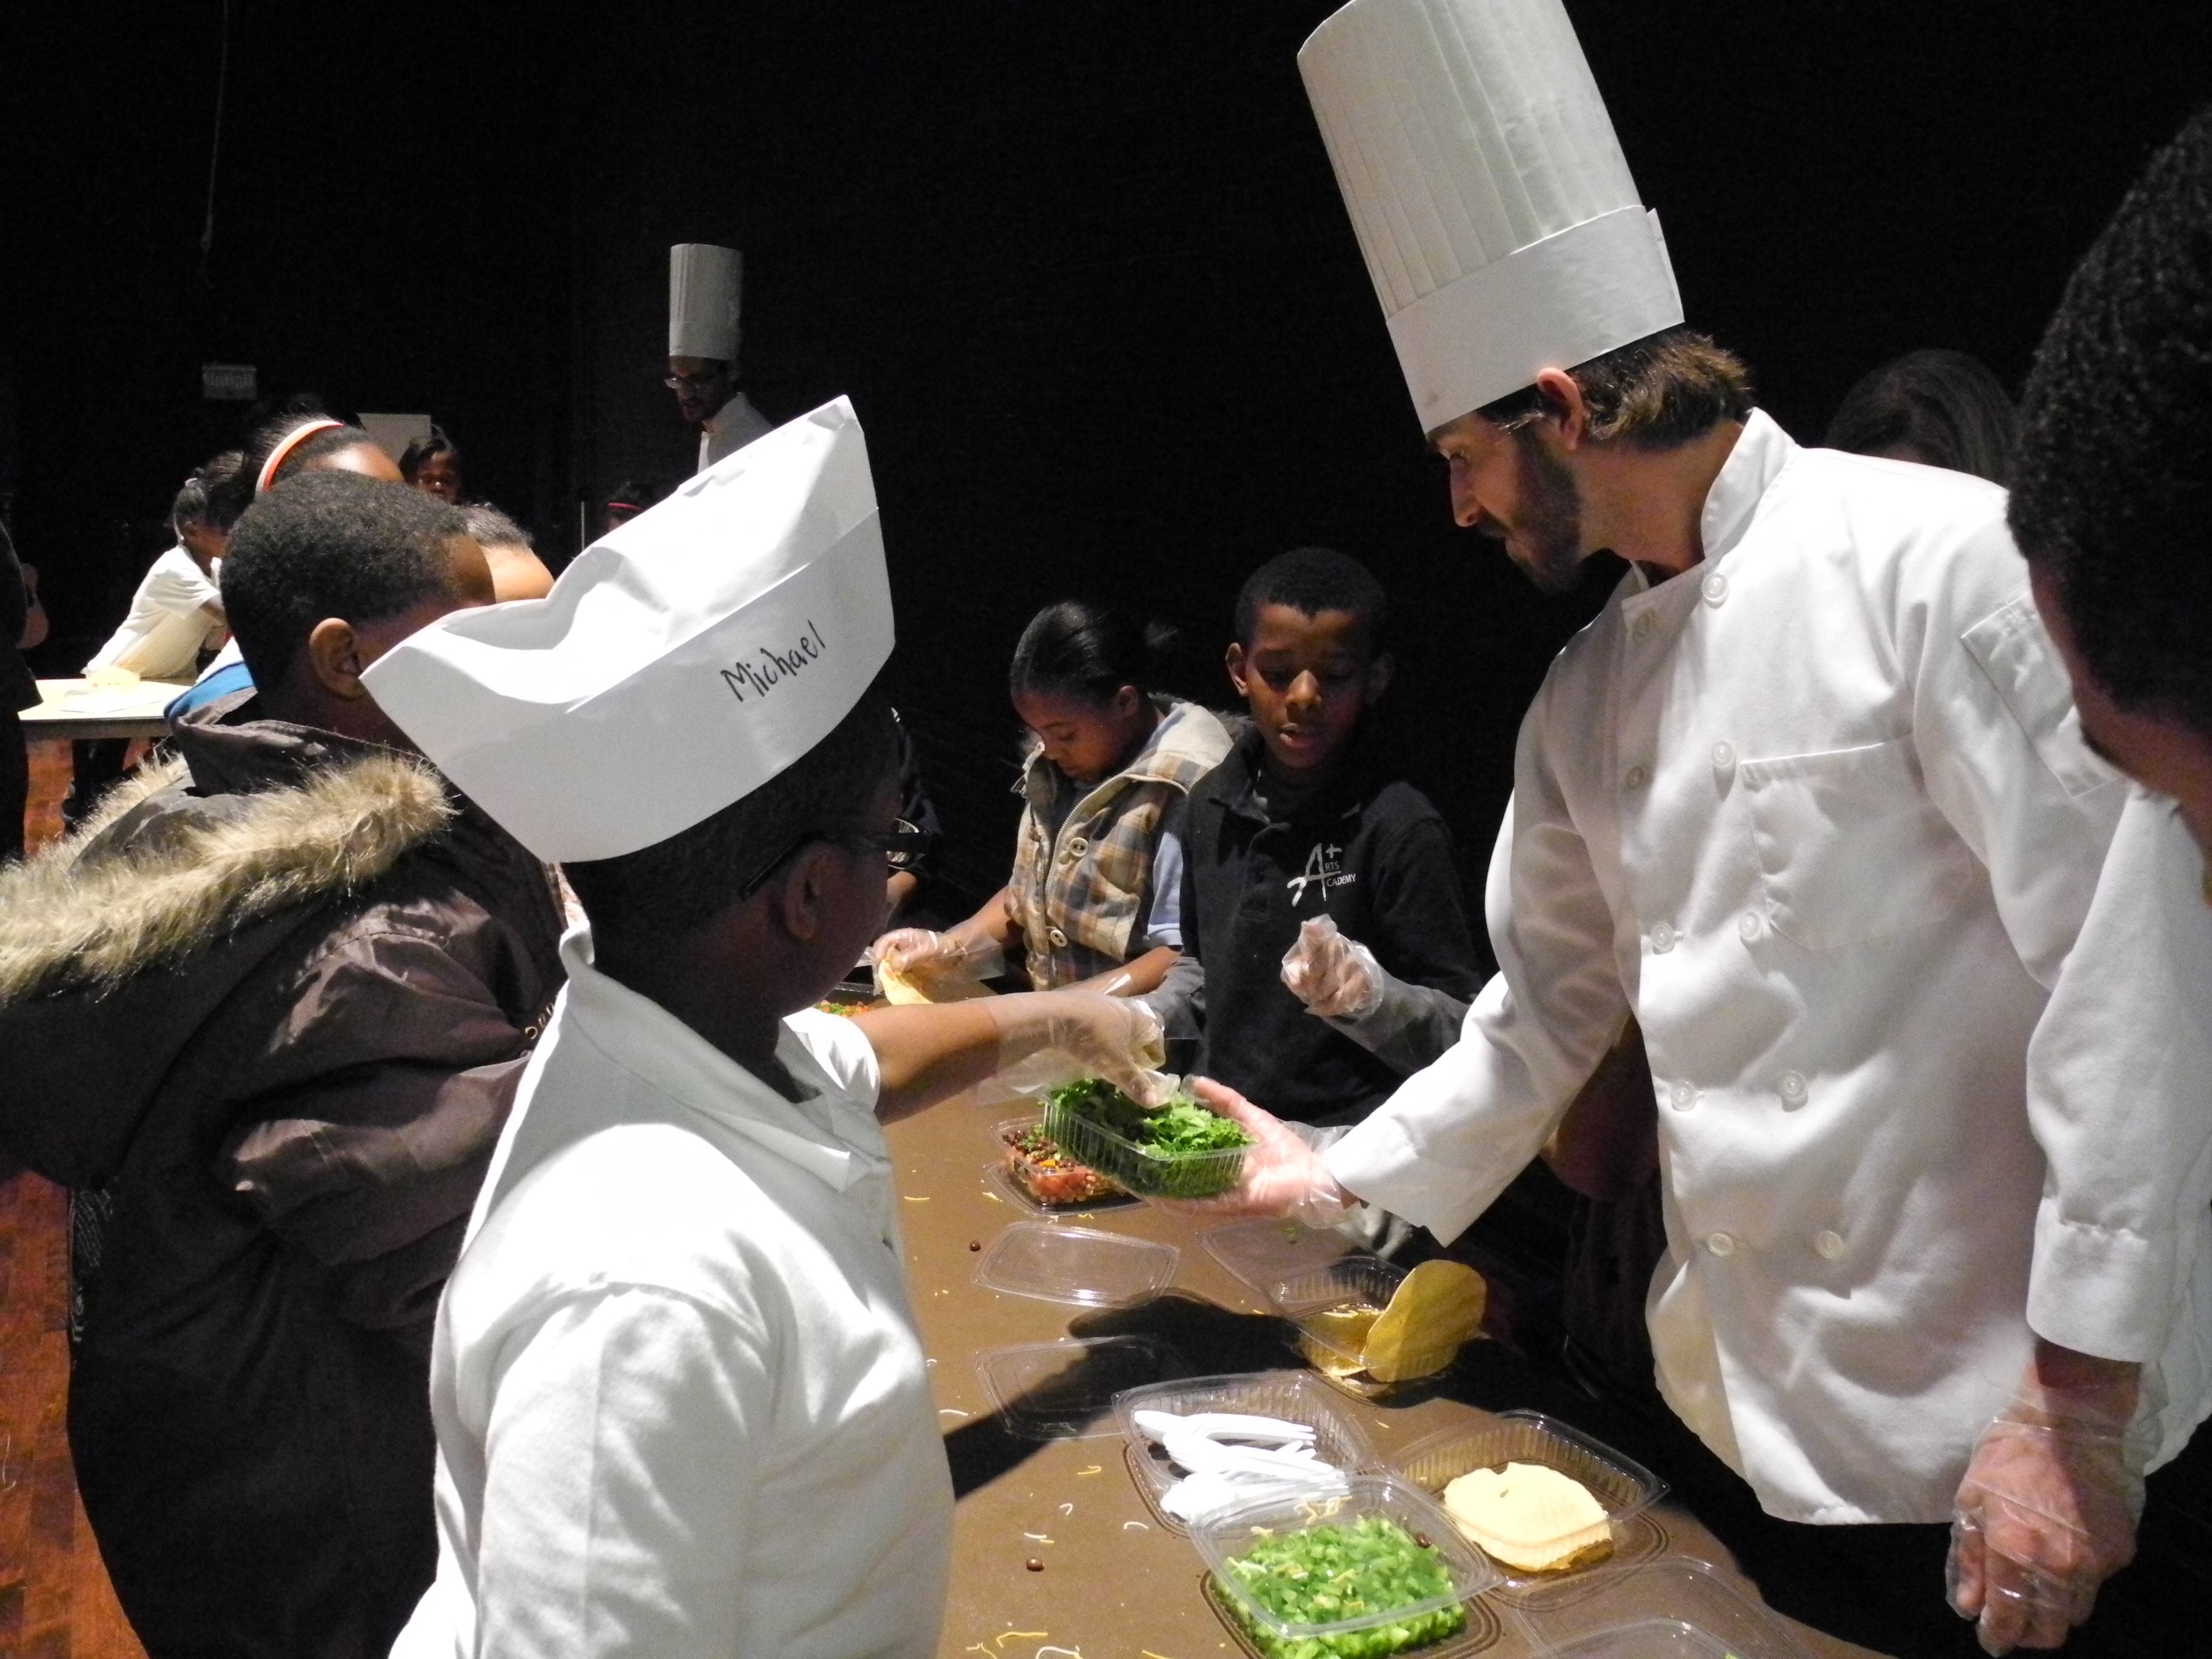 A chef holds a container of lettuce while students add ingredients to their meals.